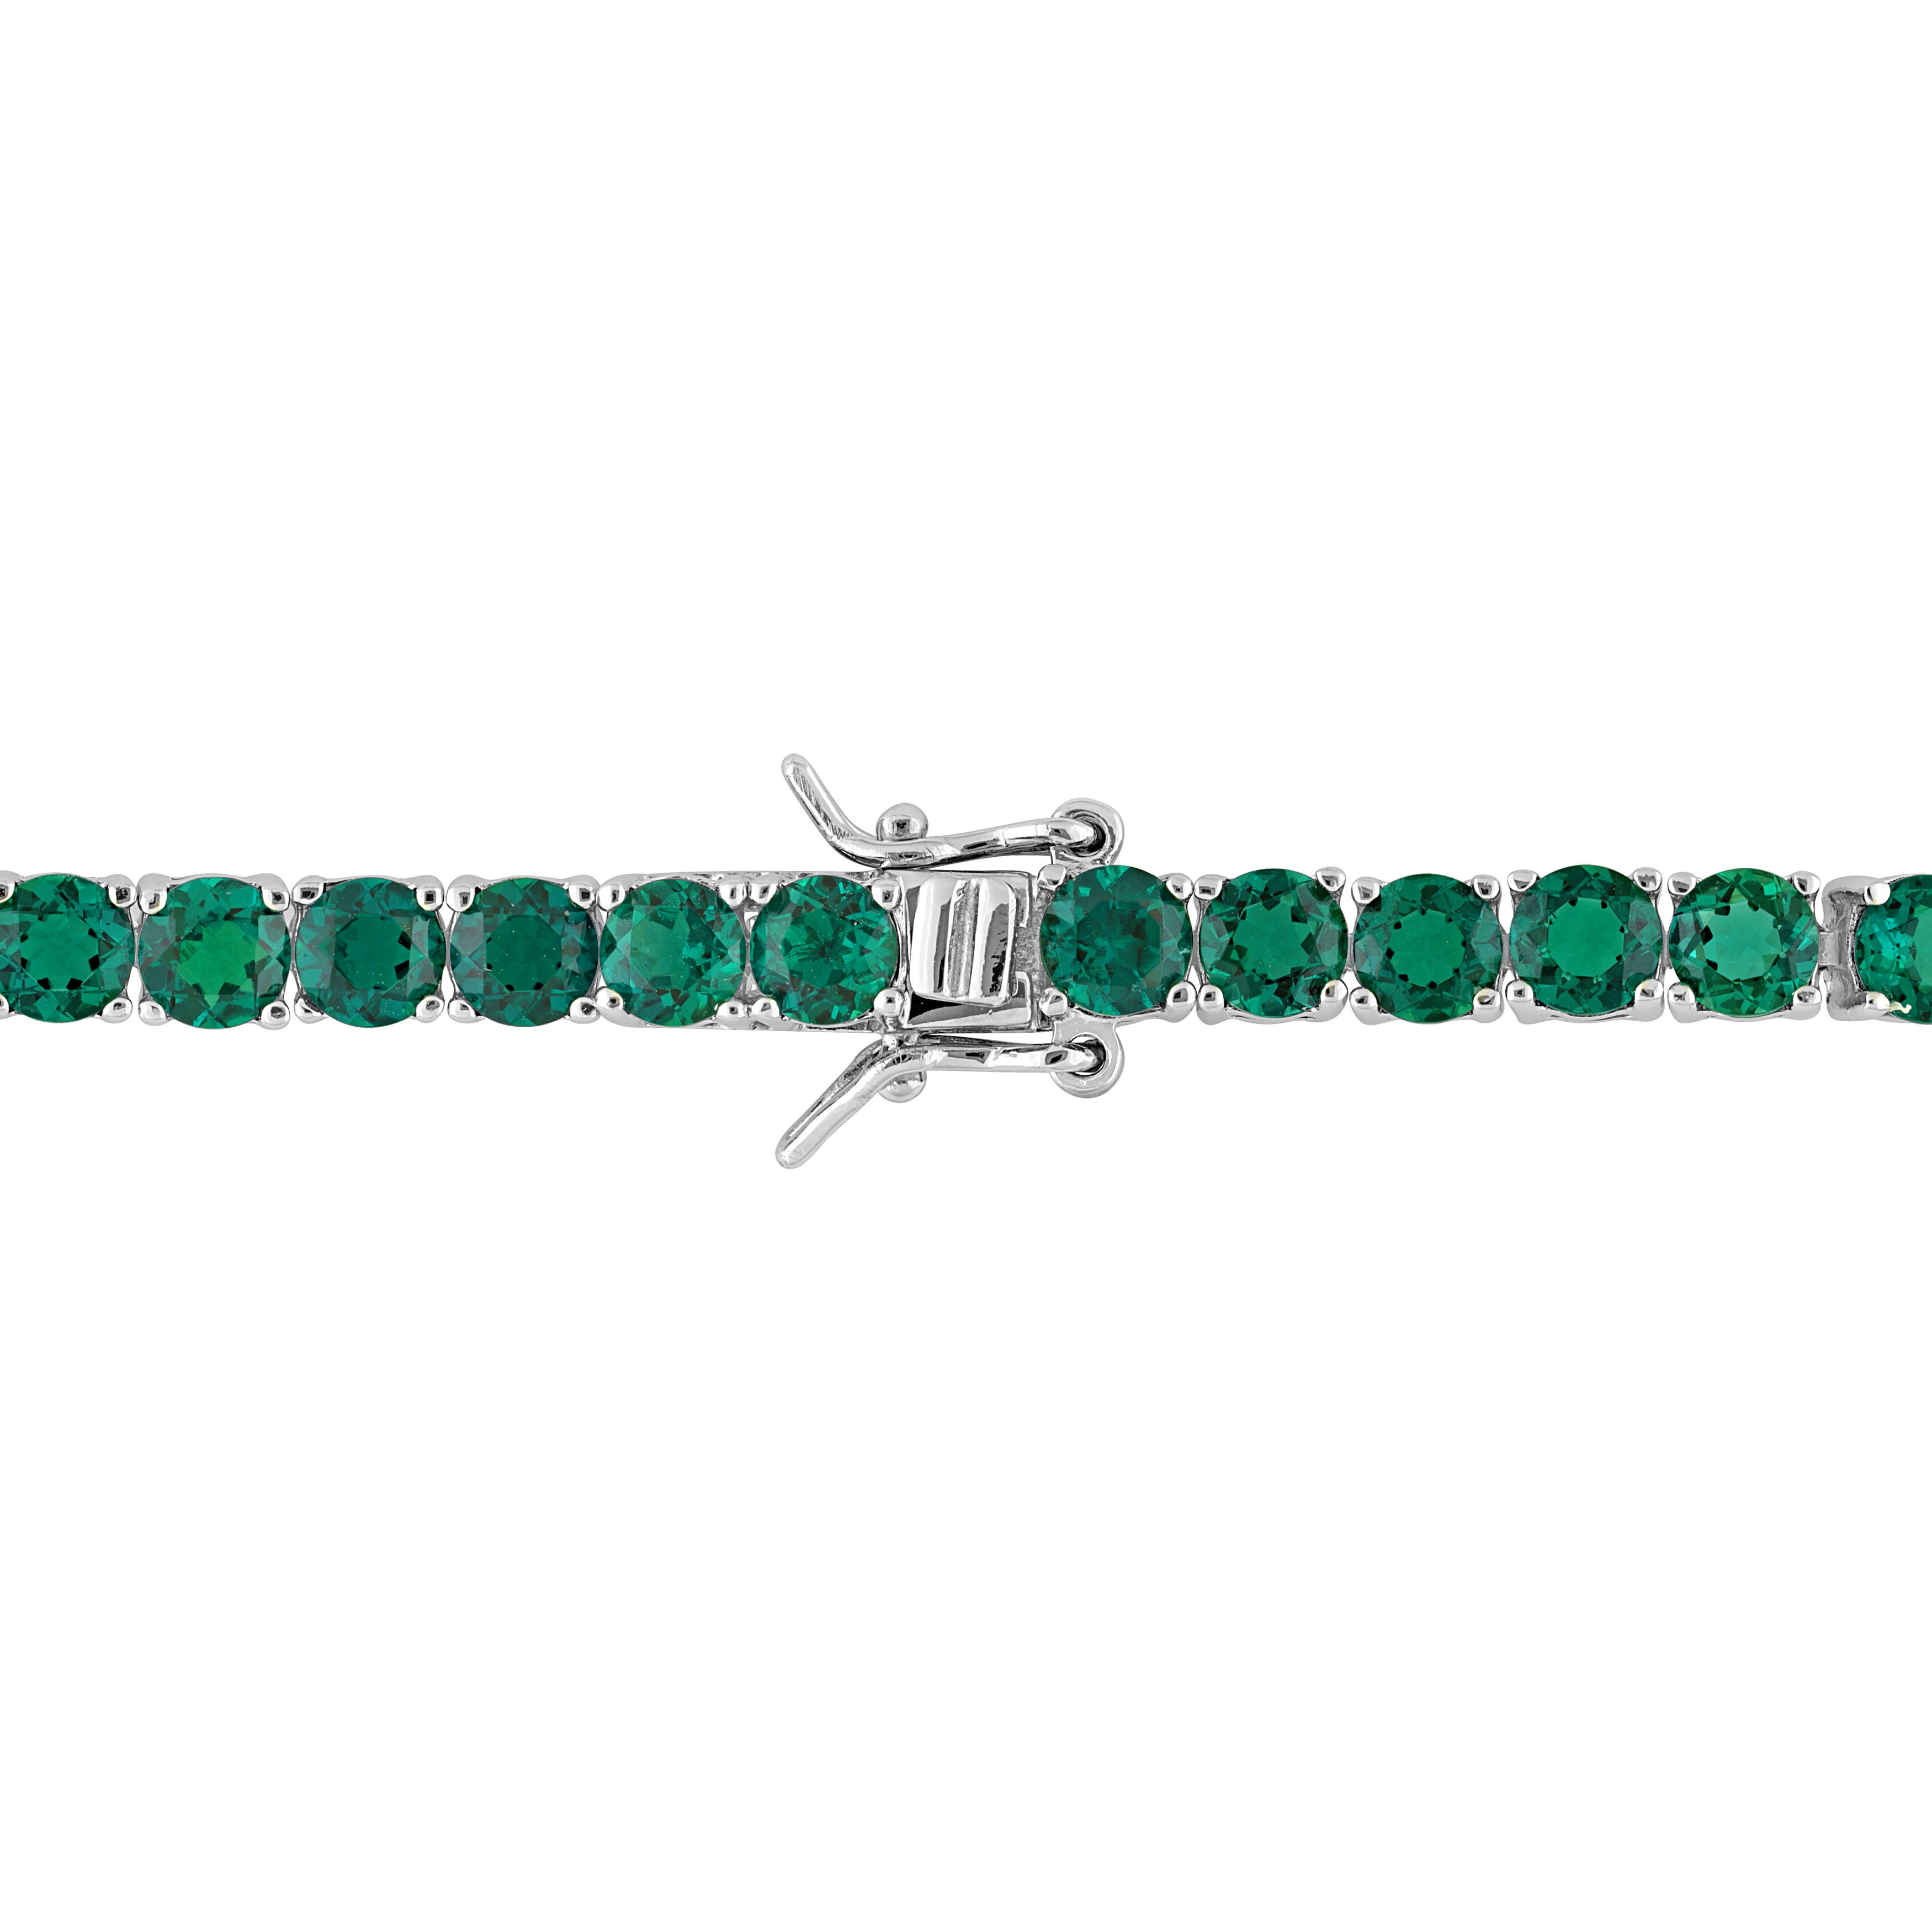 10 1/2 CT TGW Created Emerald Tennis Bracelet with Sterling Silver Clasp - 7.25 in.